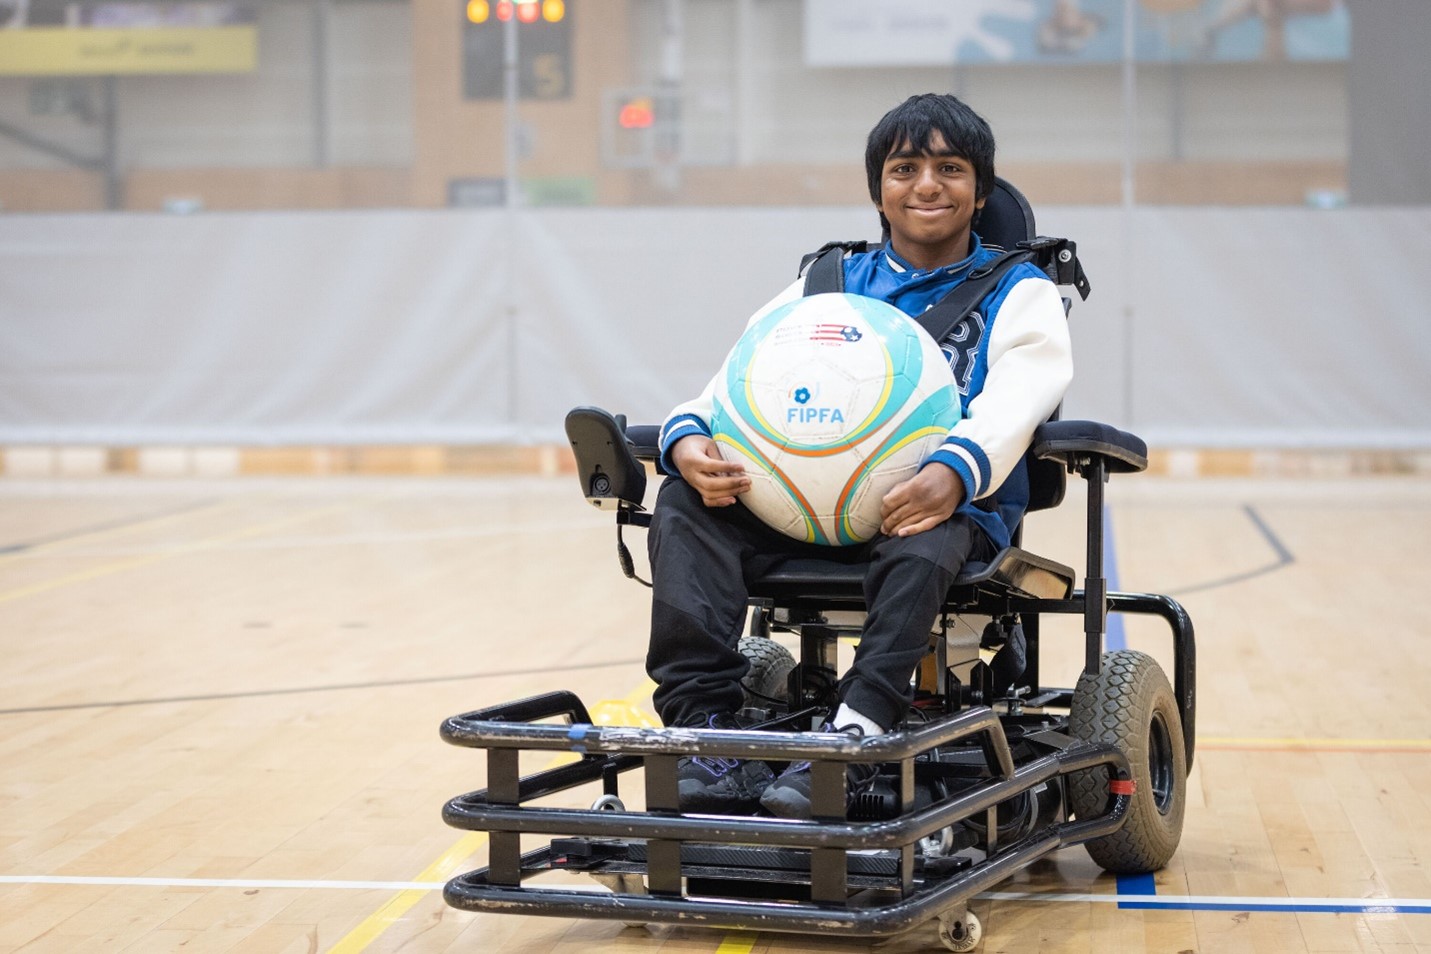 Ashmit tried powerchair football for the first time at Parafed Bay of Plenty's Healthvision Festival of Disability Sport earlier this year.